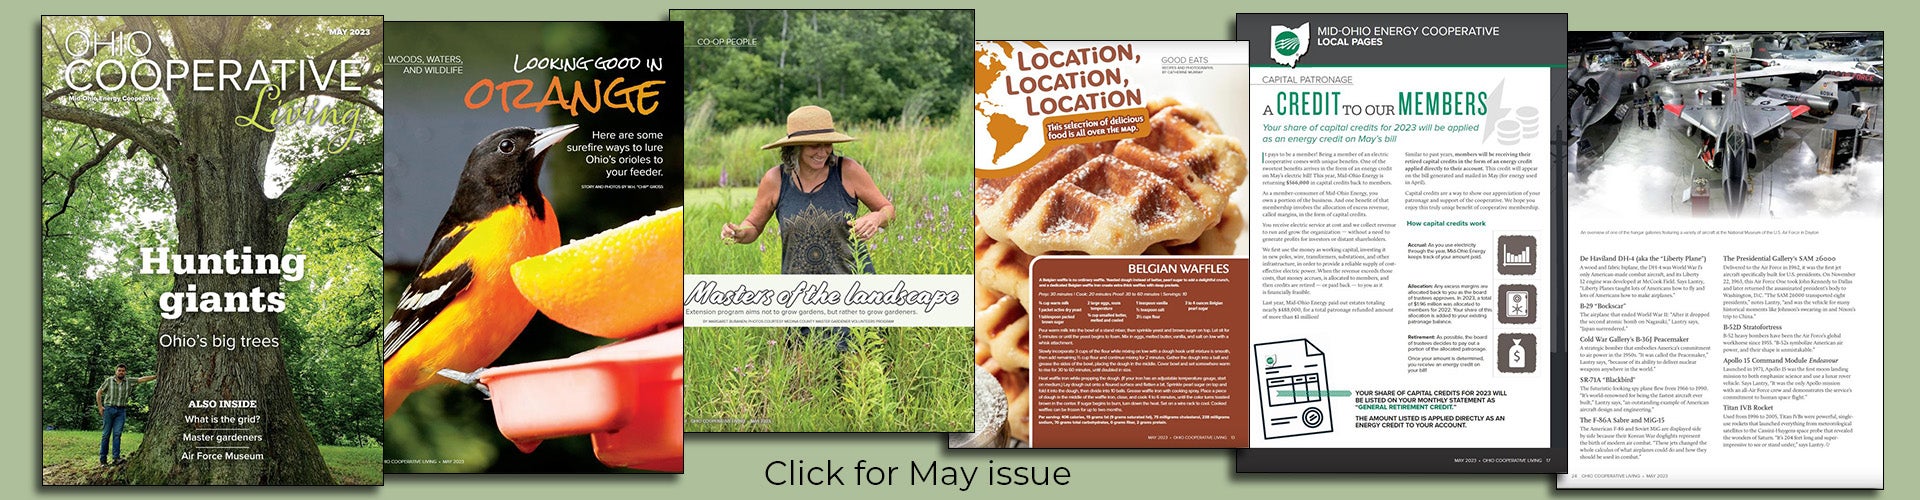 View the May issue!